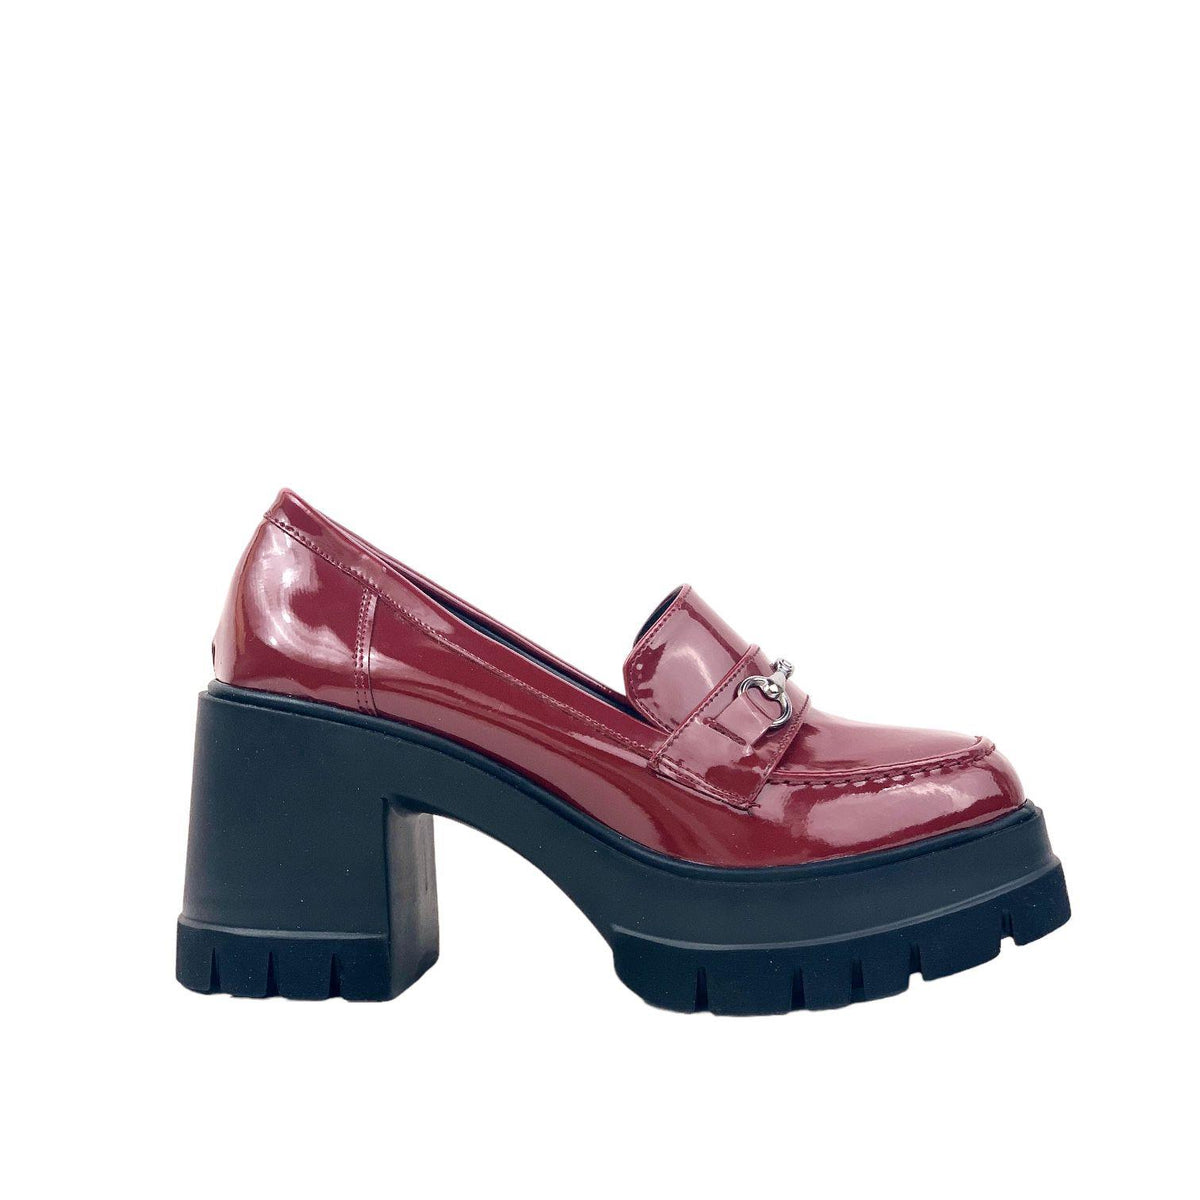 Women's Pons Bordeaux Patent Leather High Heeled Loafer Shoes 10 Cm 604